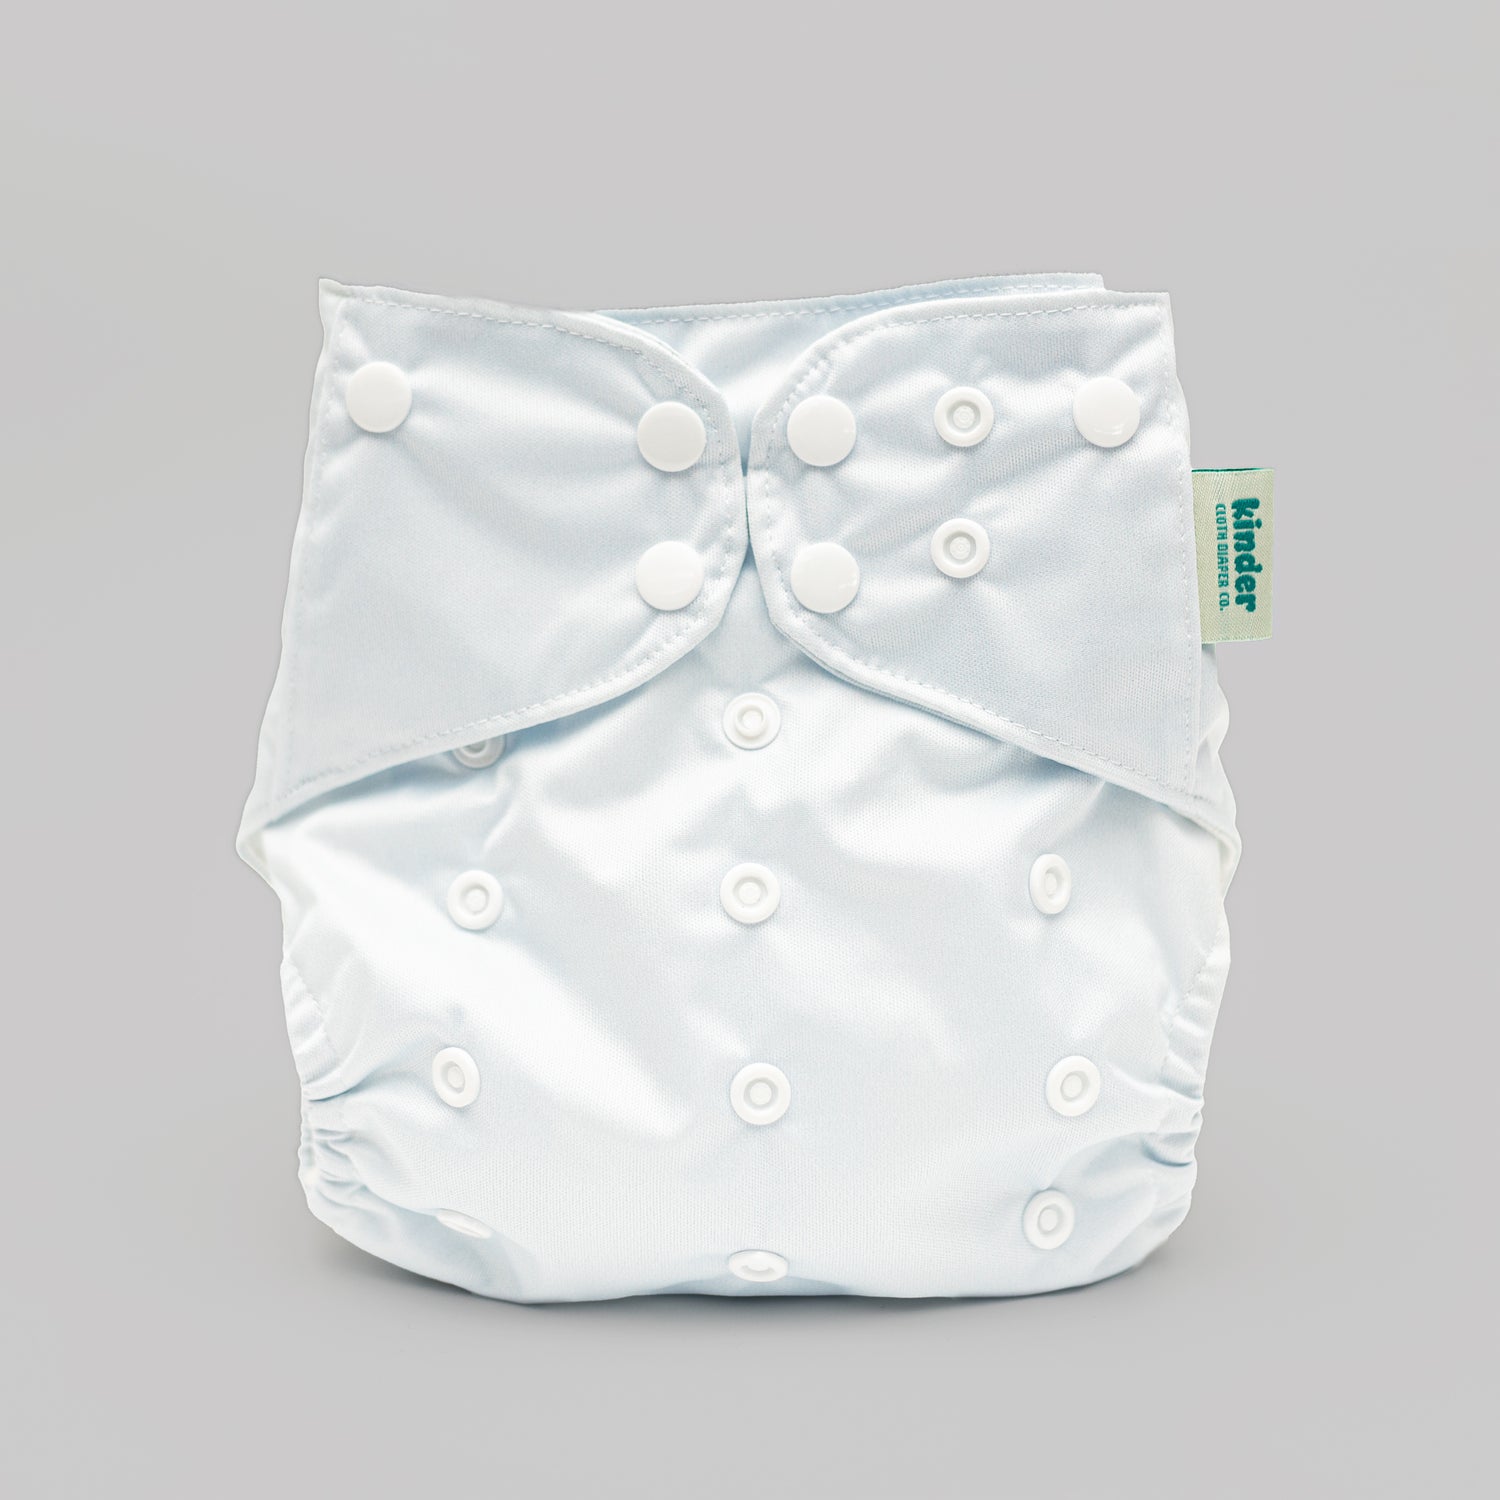 Bold Bright Reusable Modern Cloth Pocket Diaper Fits from Birth to Potty Training Toddler 60lbs 7lbs AWJ Tummy Panel White Neutral